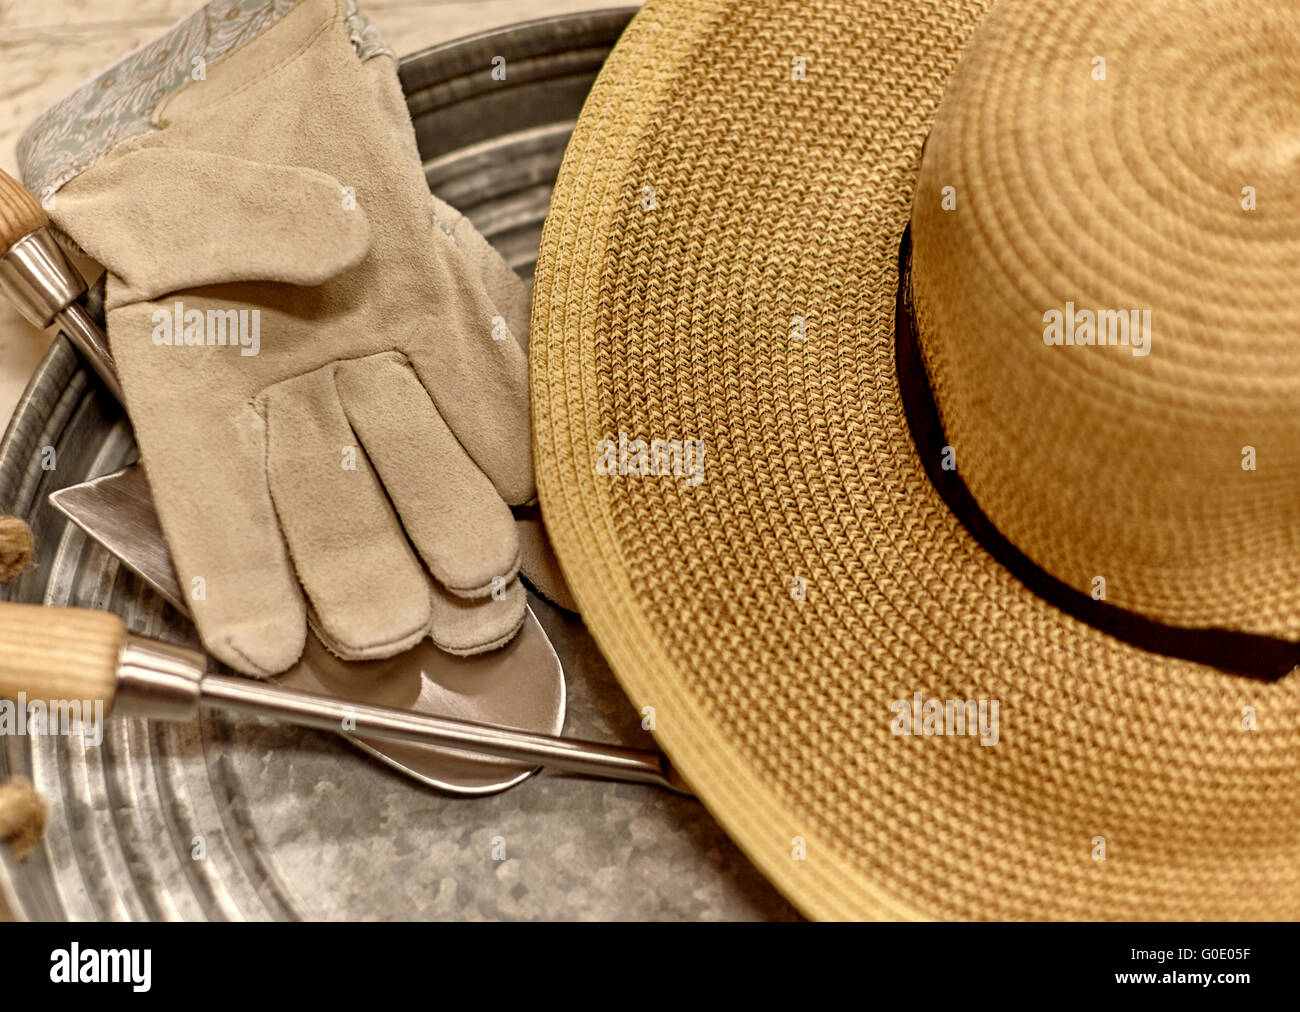 Garden work gloves, sun hat, and trowel on a tray with shallow depth of field Stock Photo